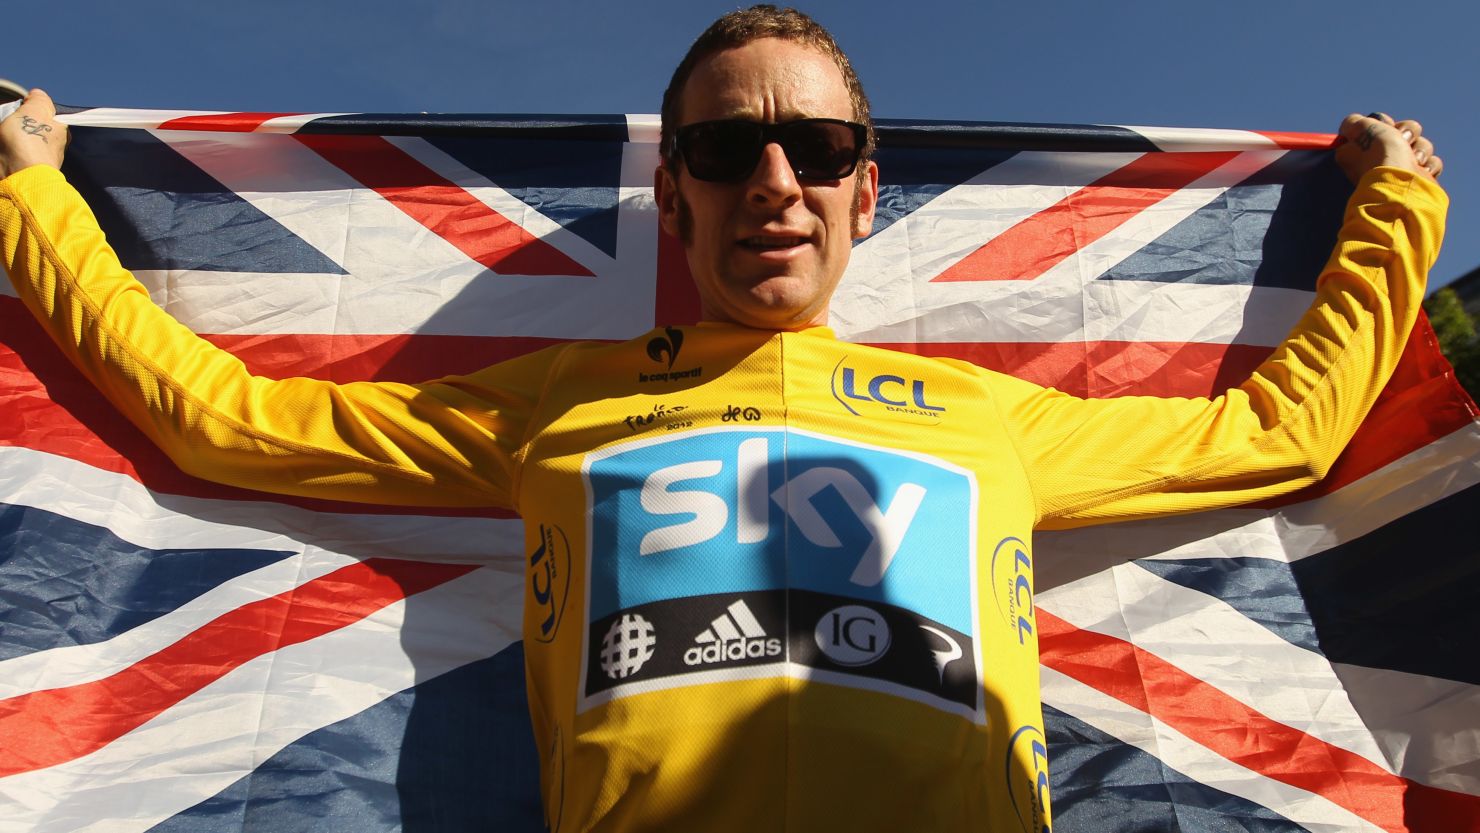 Bradley Wiggins' best finish in the Tour de France prior to this year was fourth in the 2009 race.